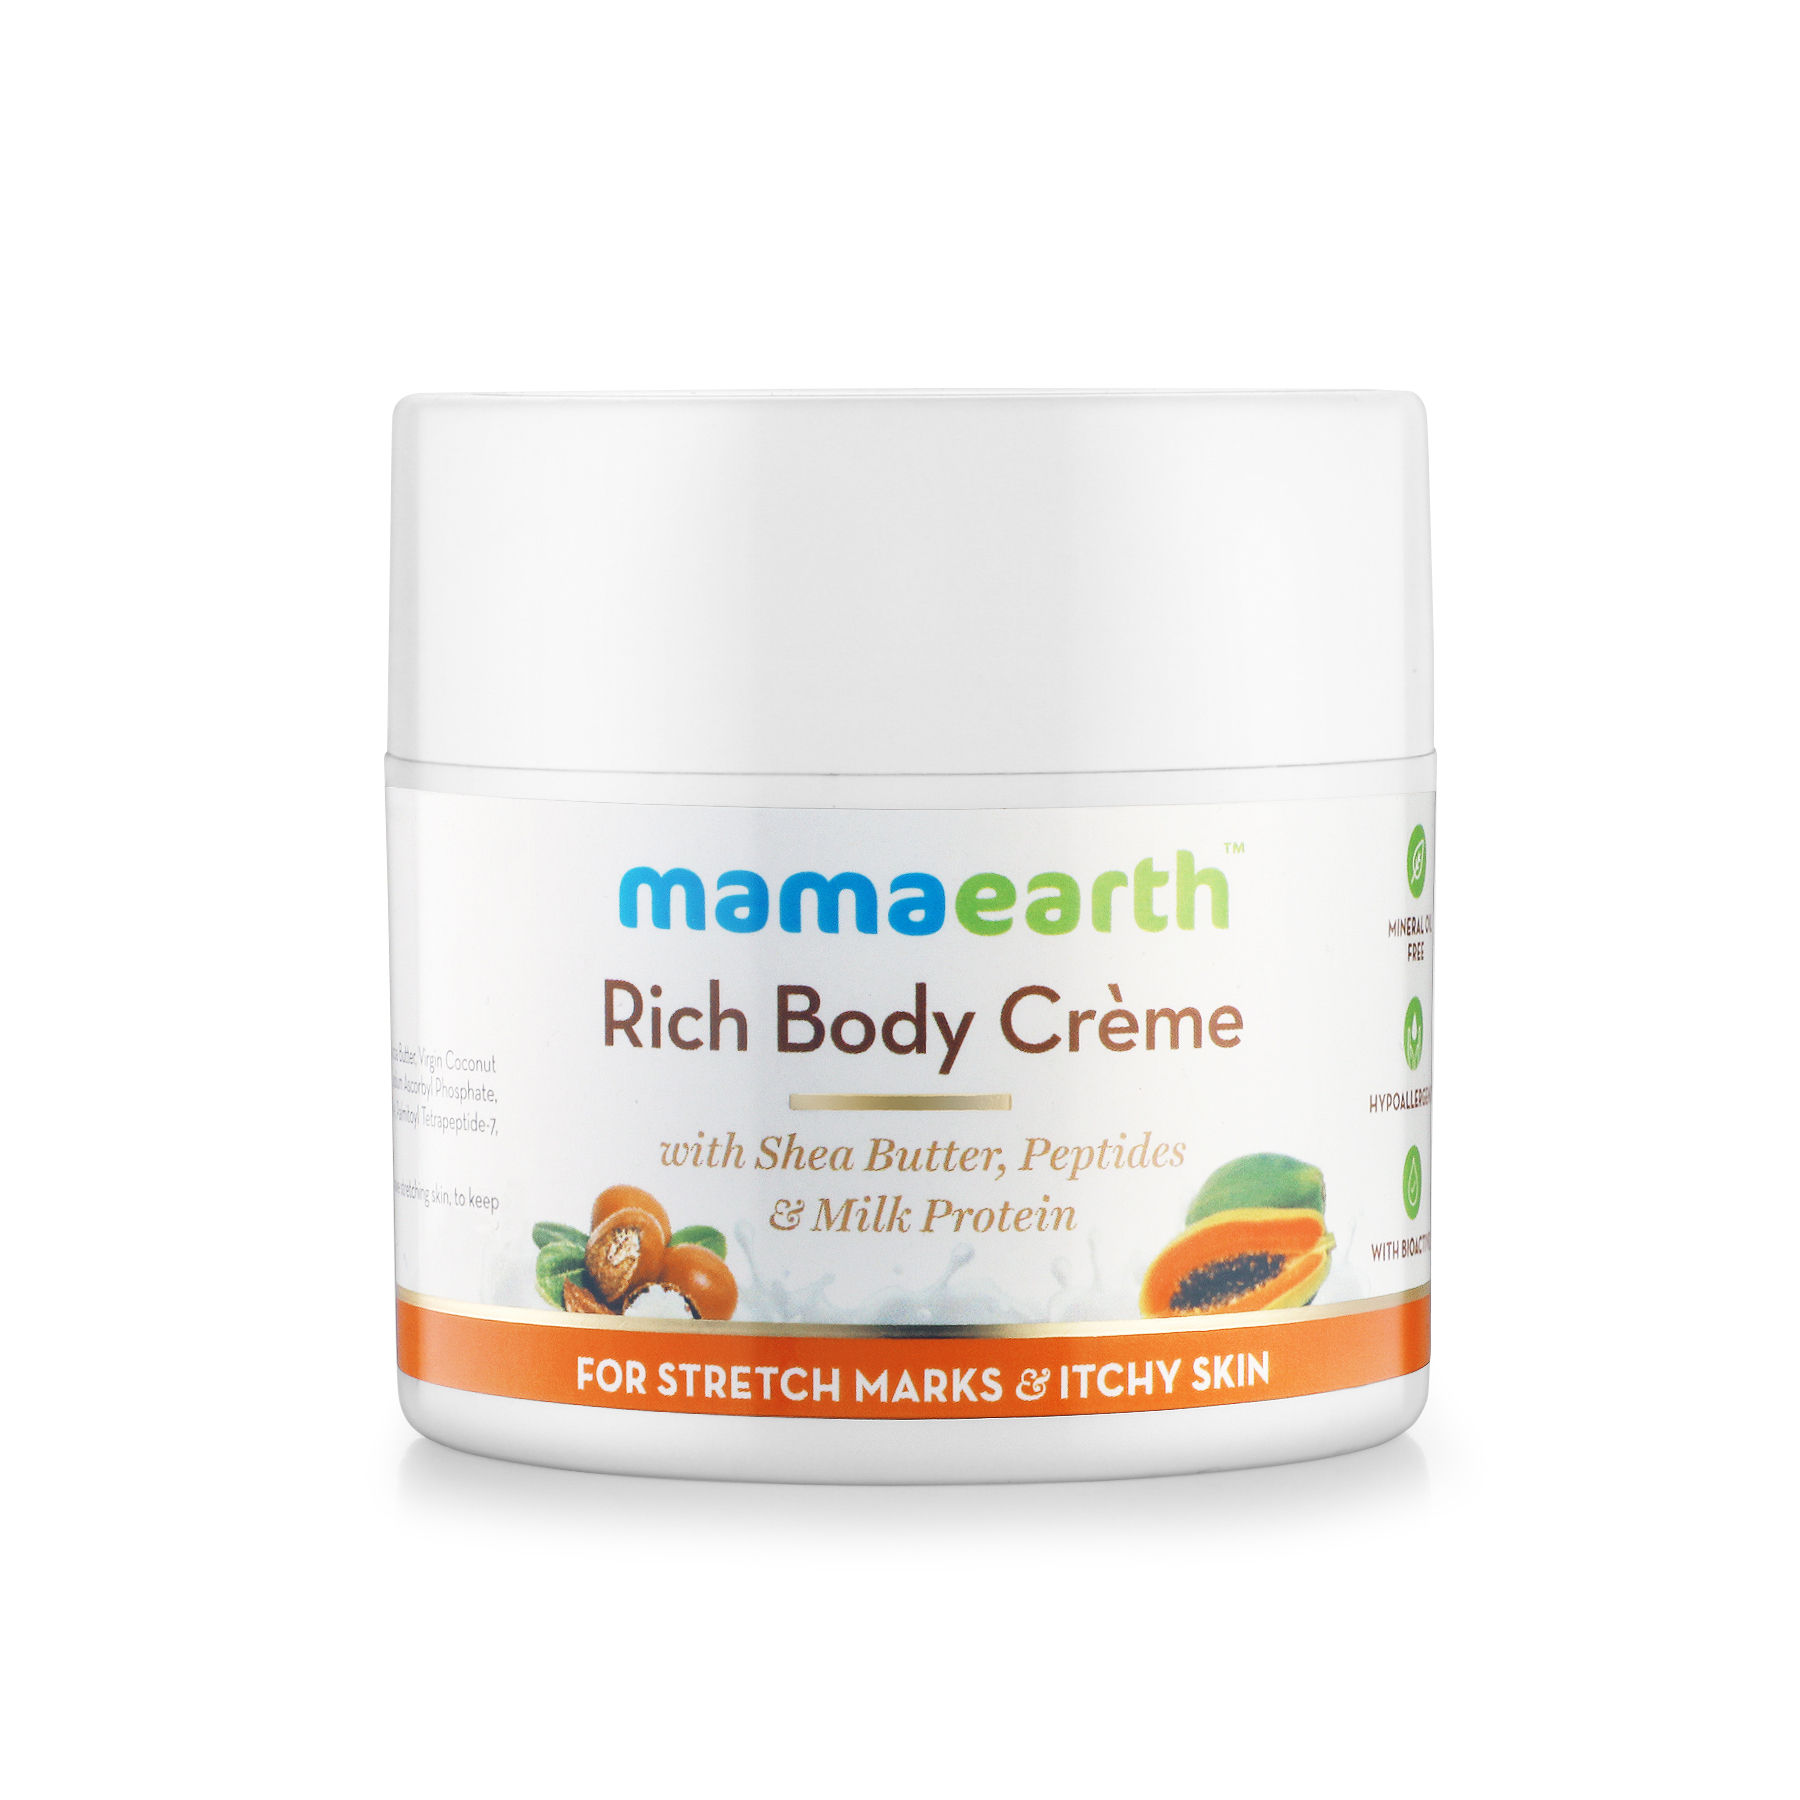 Mamaearth Rich Body Creme For Stretch Marks & Itchy Skin